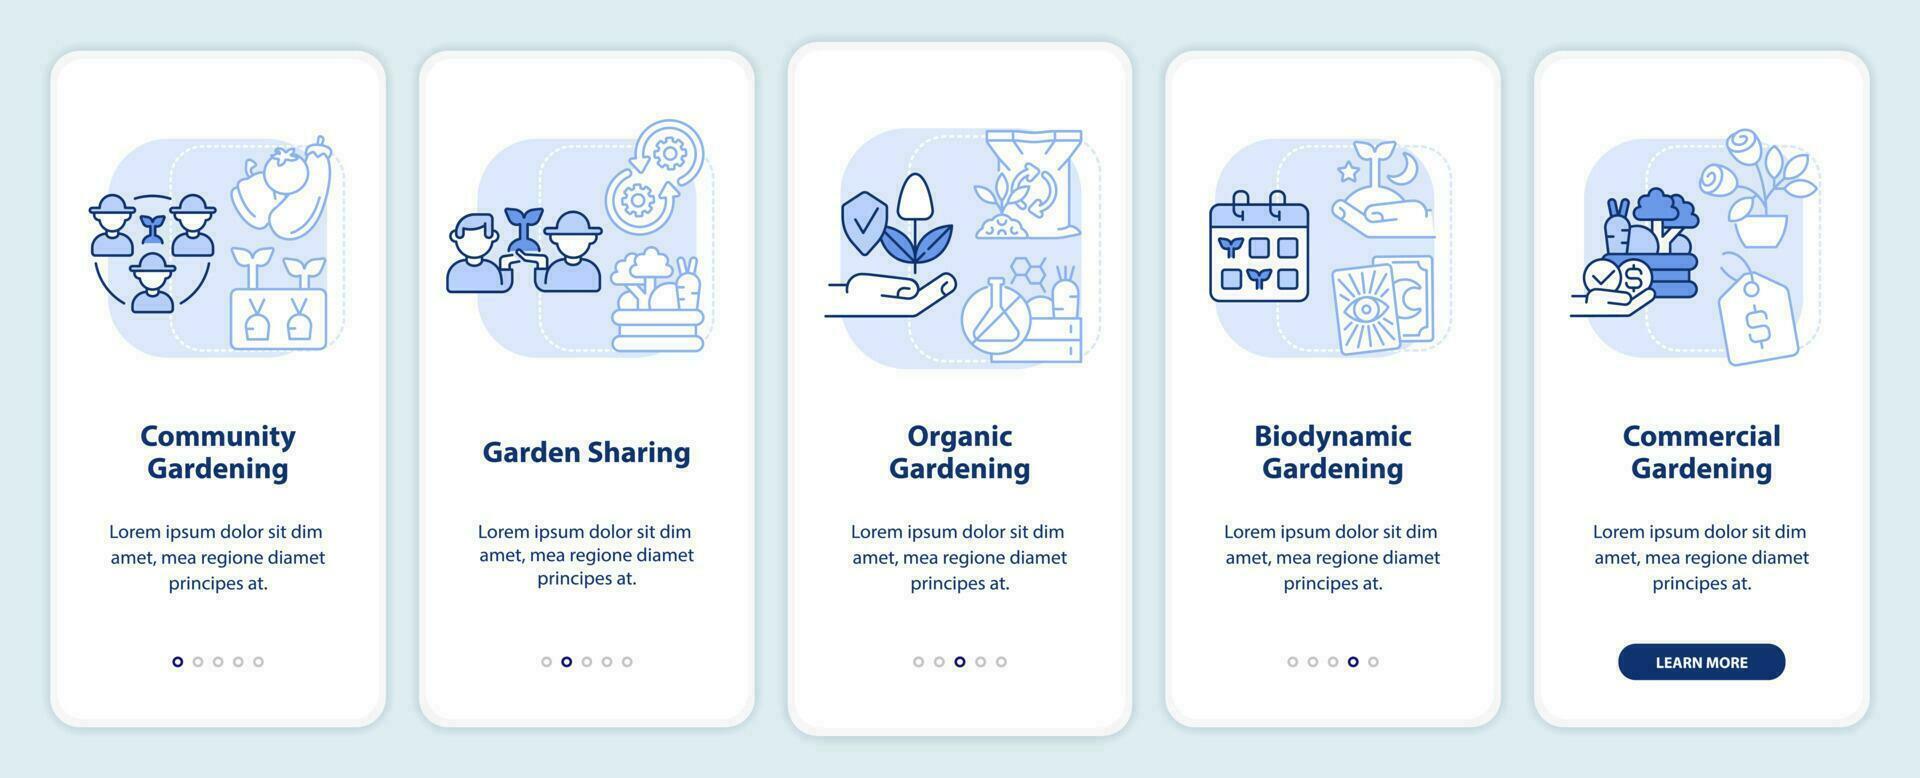 Types of gardening light blue onboarding mobile app screen. Walkthrough 5 steps editable graphic instructions with linear concepts. UI, UX, GUI template vector